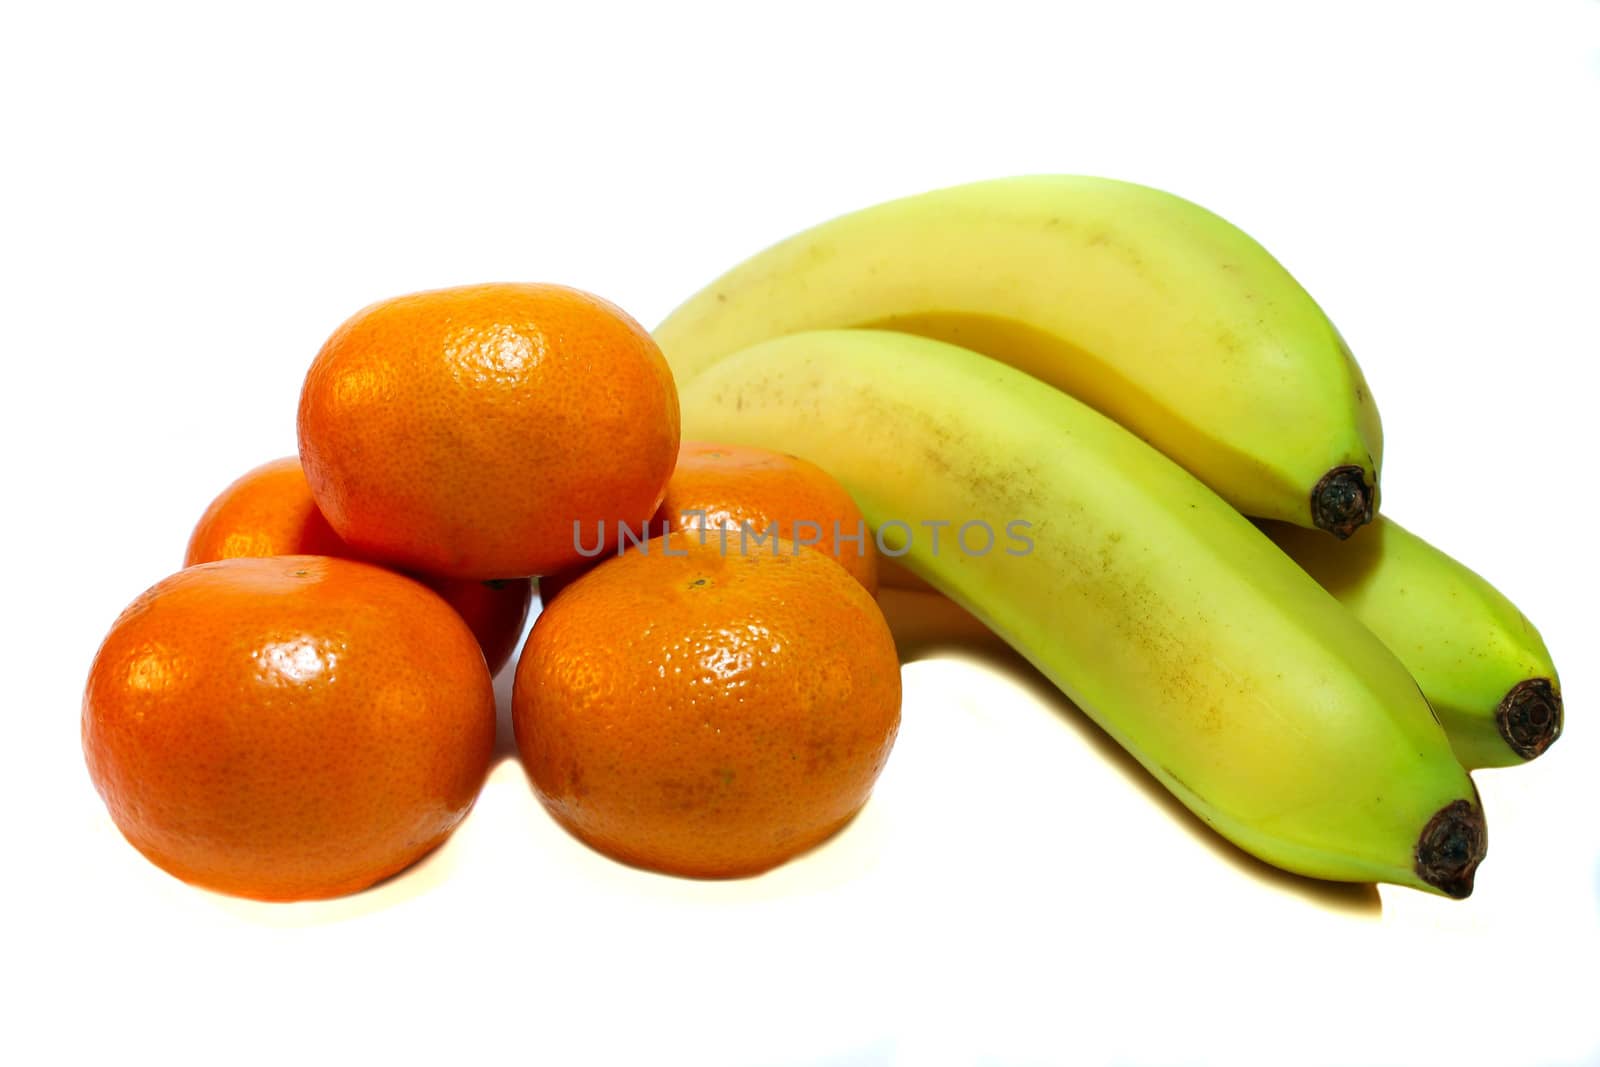 Tangerines and bananas on a white background by LenoraA